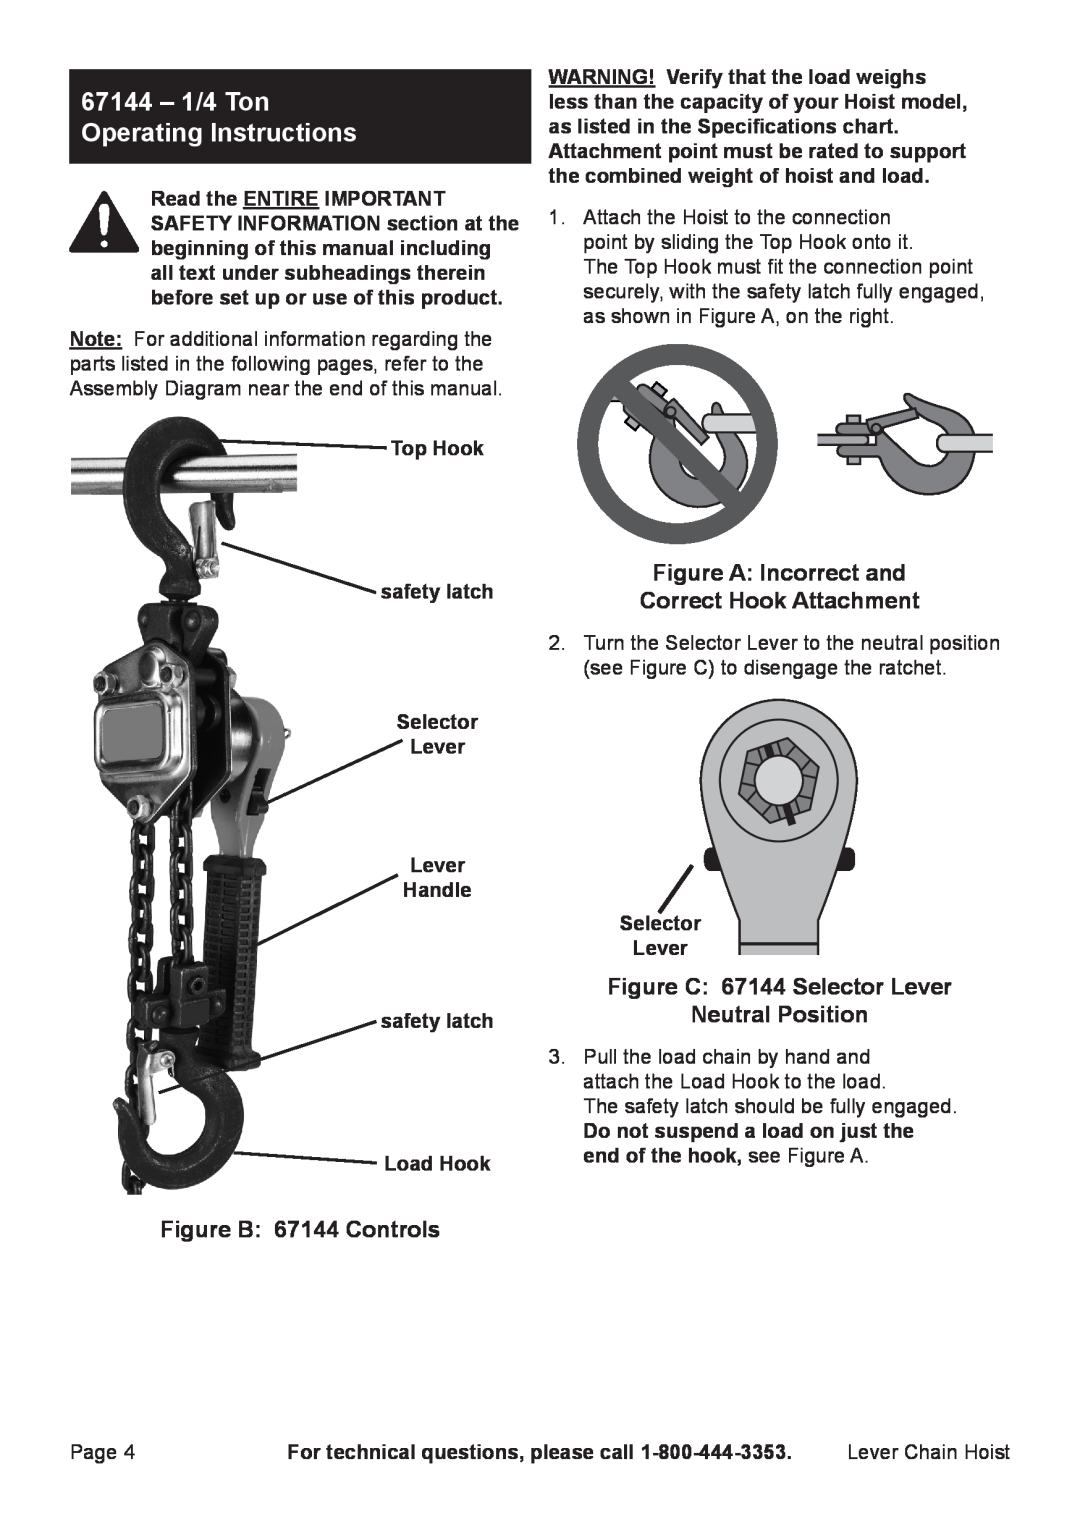 Harbor Freight Tools 66106 67144 - 1/4 Ton Operating Instructions, Figure B 67144 Controls, Top Hook, Selector Lever, Page 